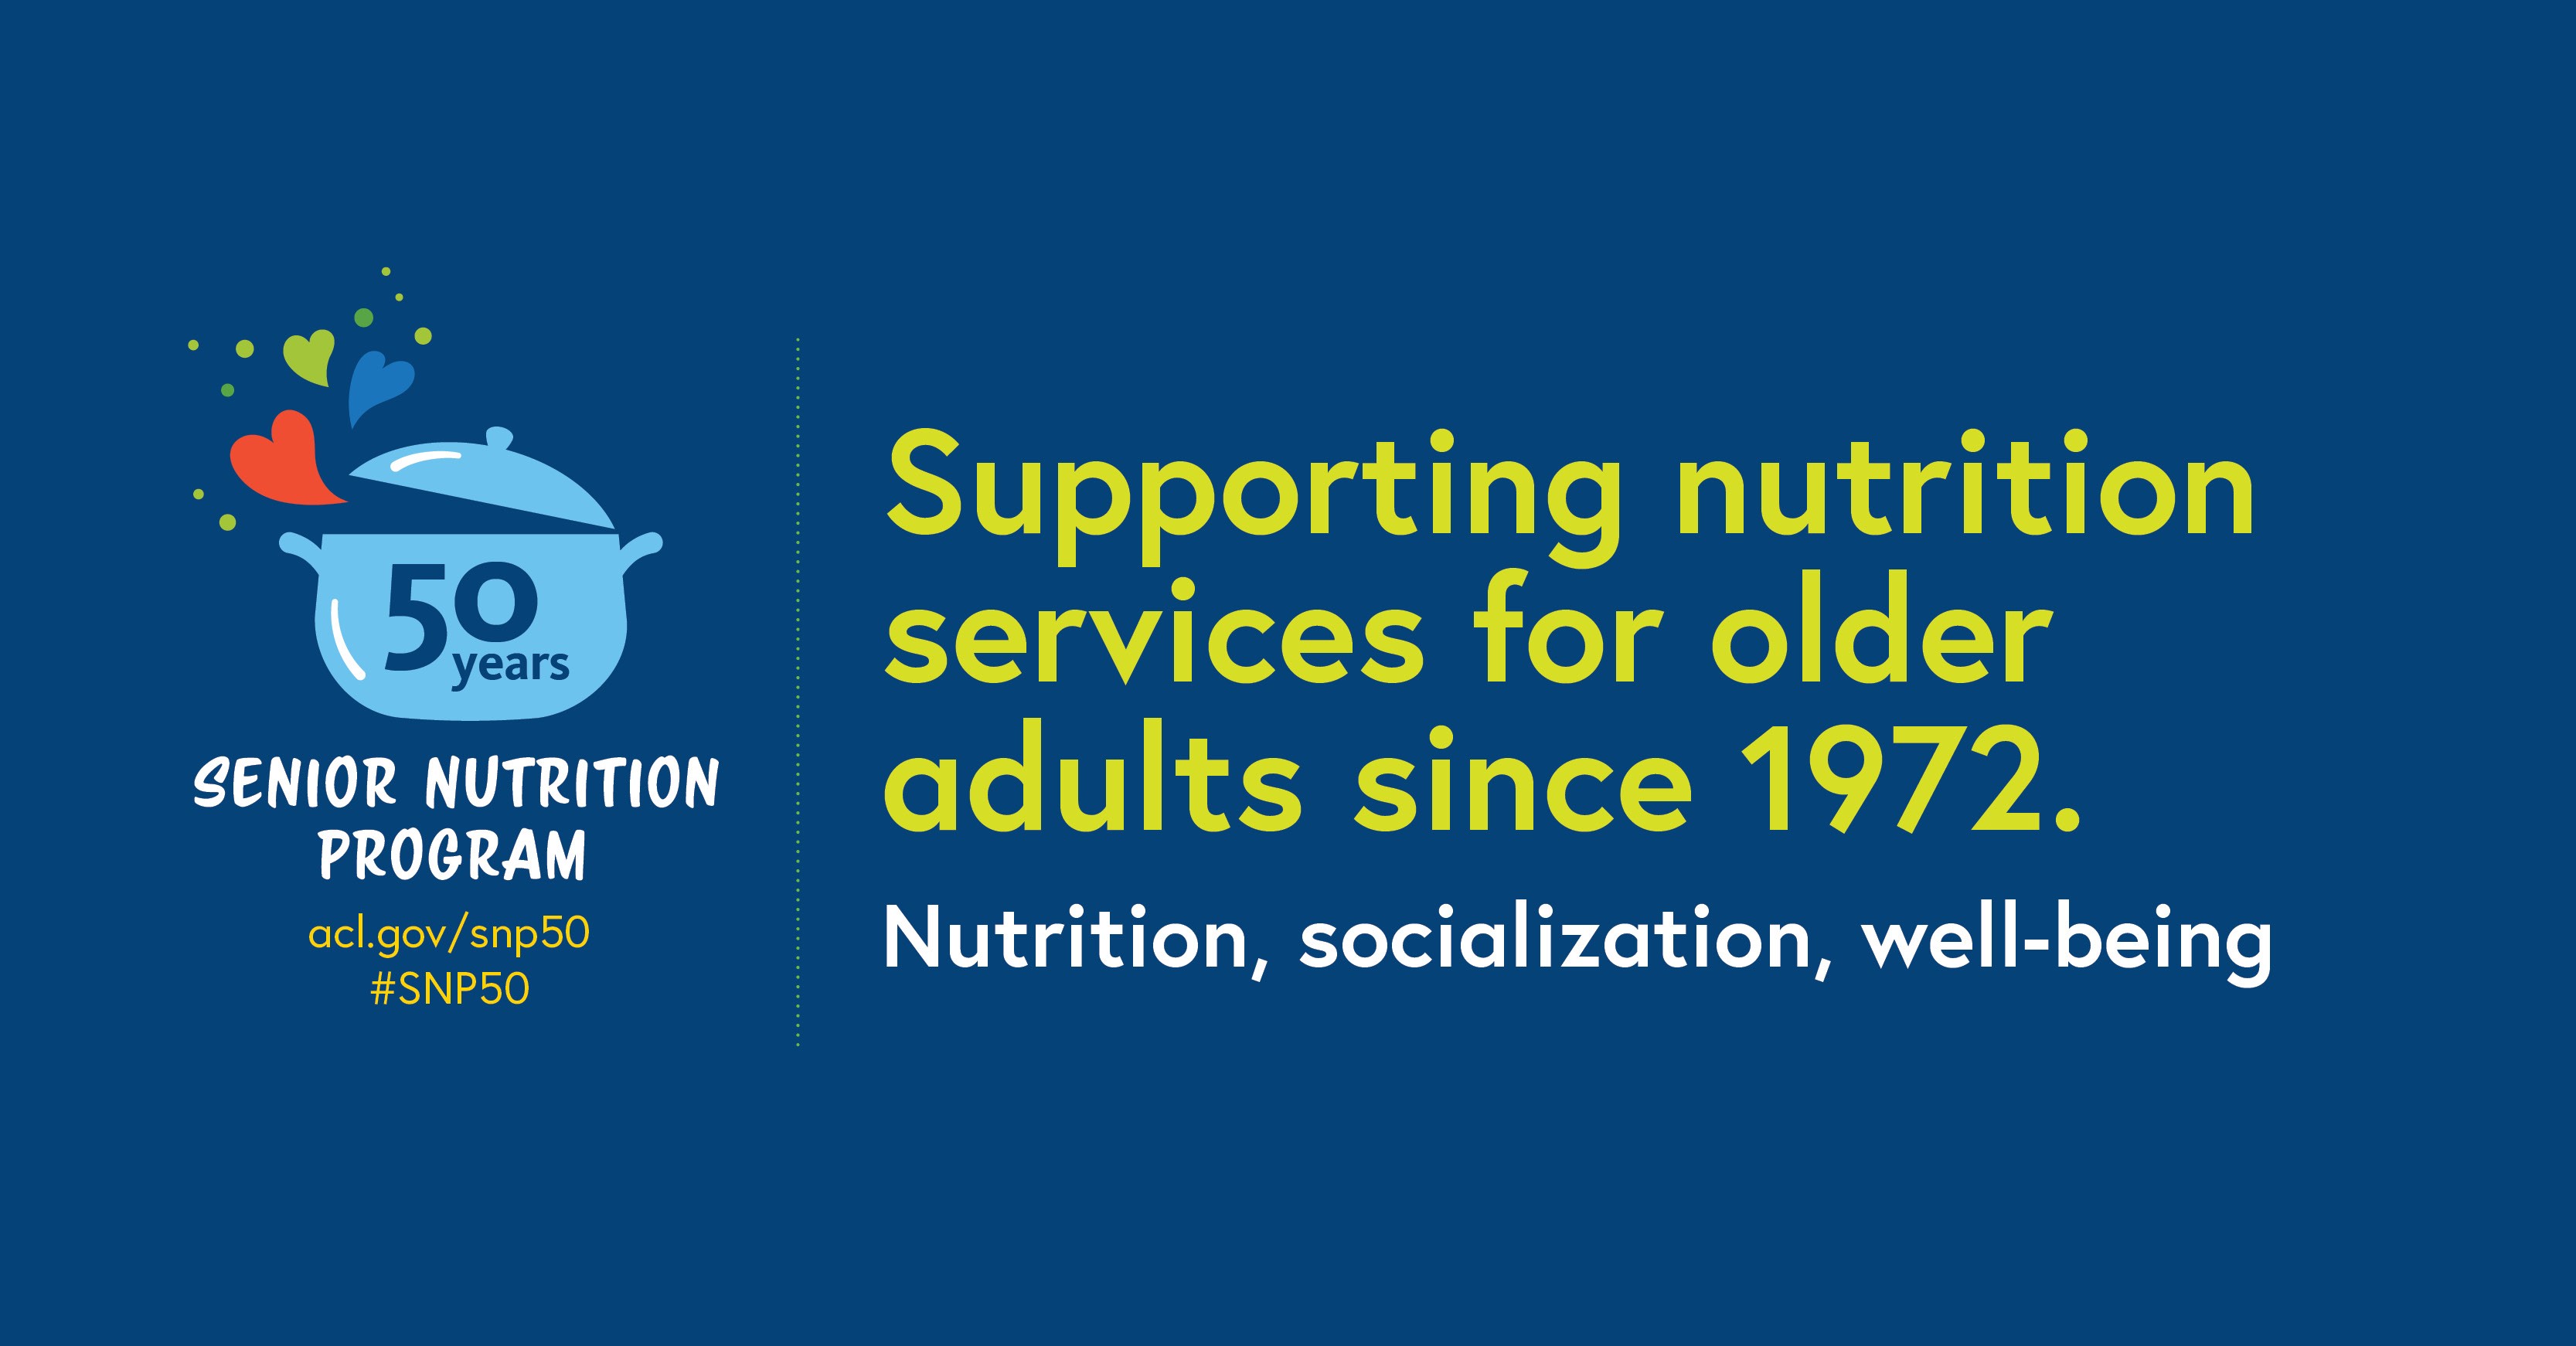 Social Graphic: Supporting nutrition services for older adults since 1972. Nutrition, socialization, well-being. 50 years. Senior Nutrition Program. acl.gov/snp50 #SNP50